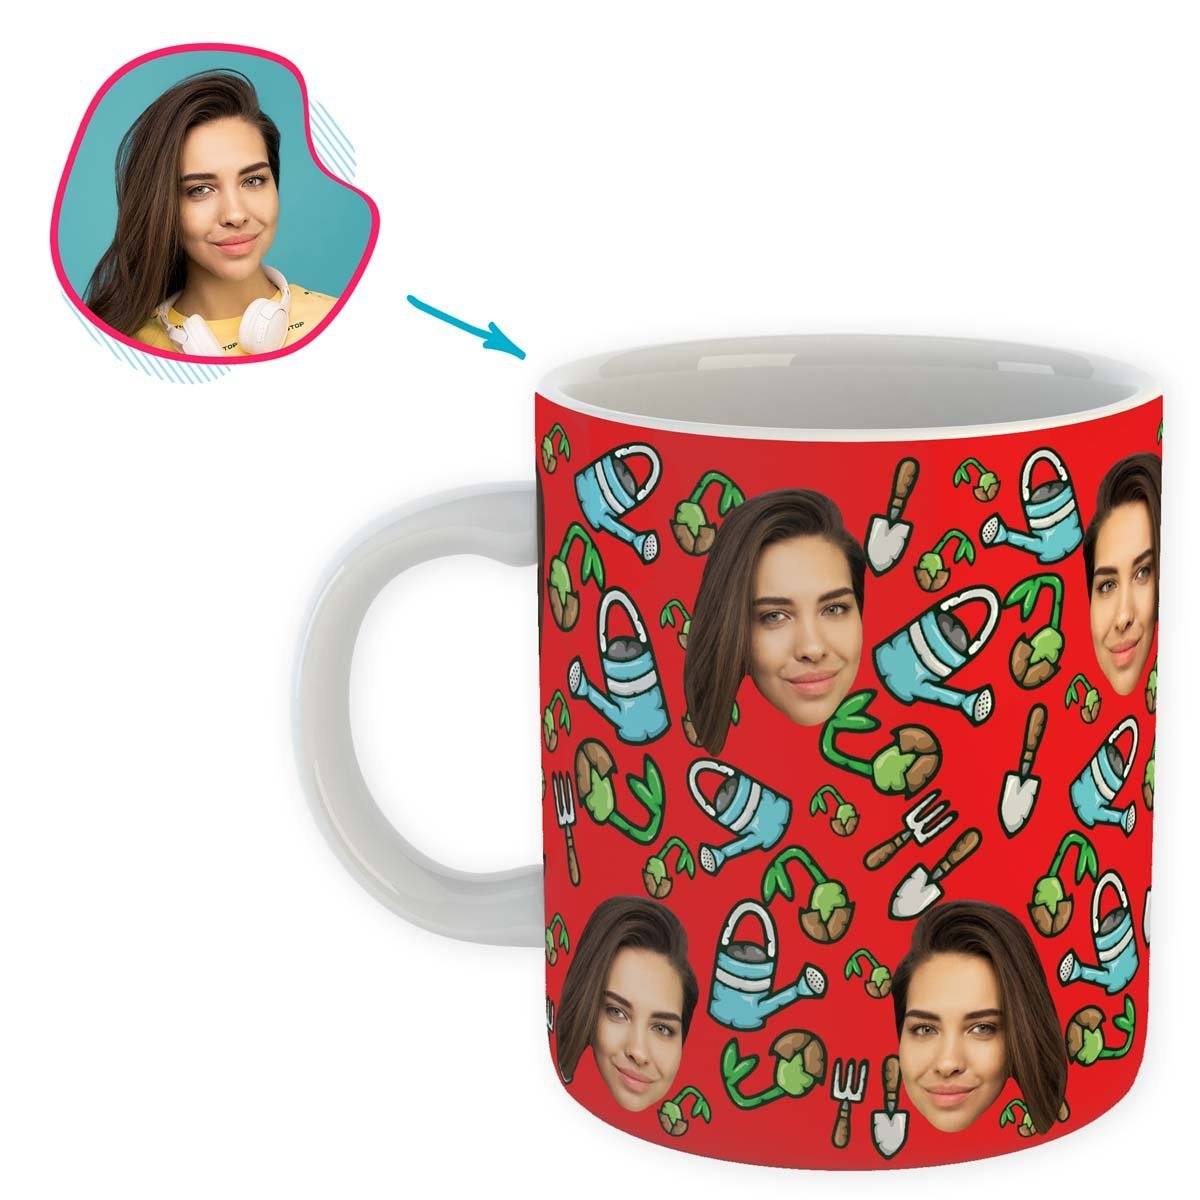 red Gardening mug personalized with photo of face printed on it